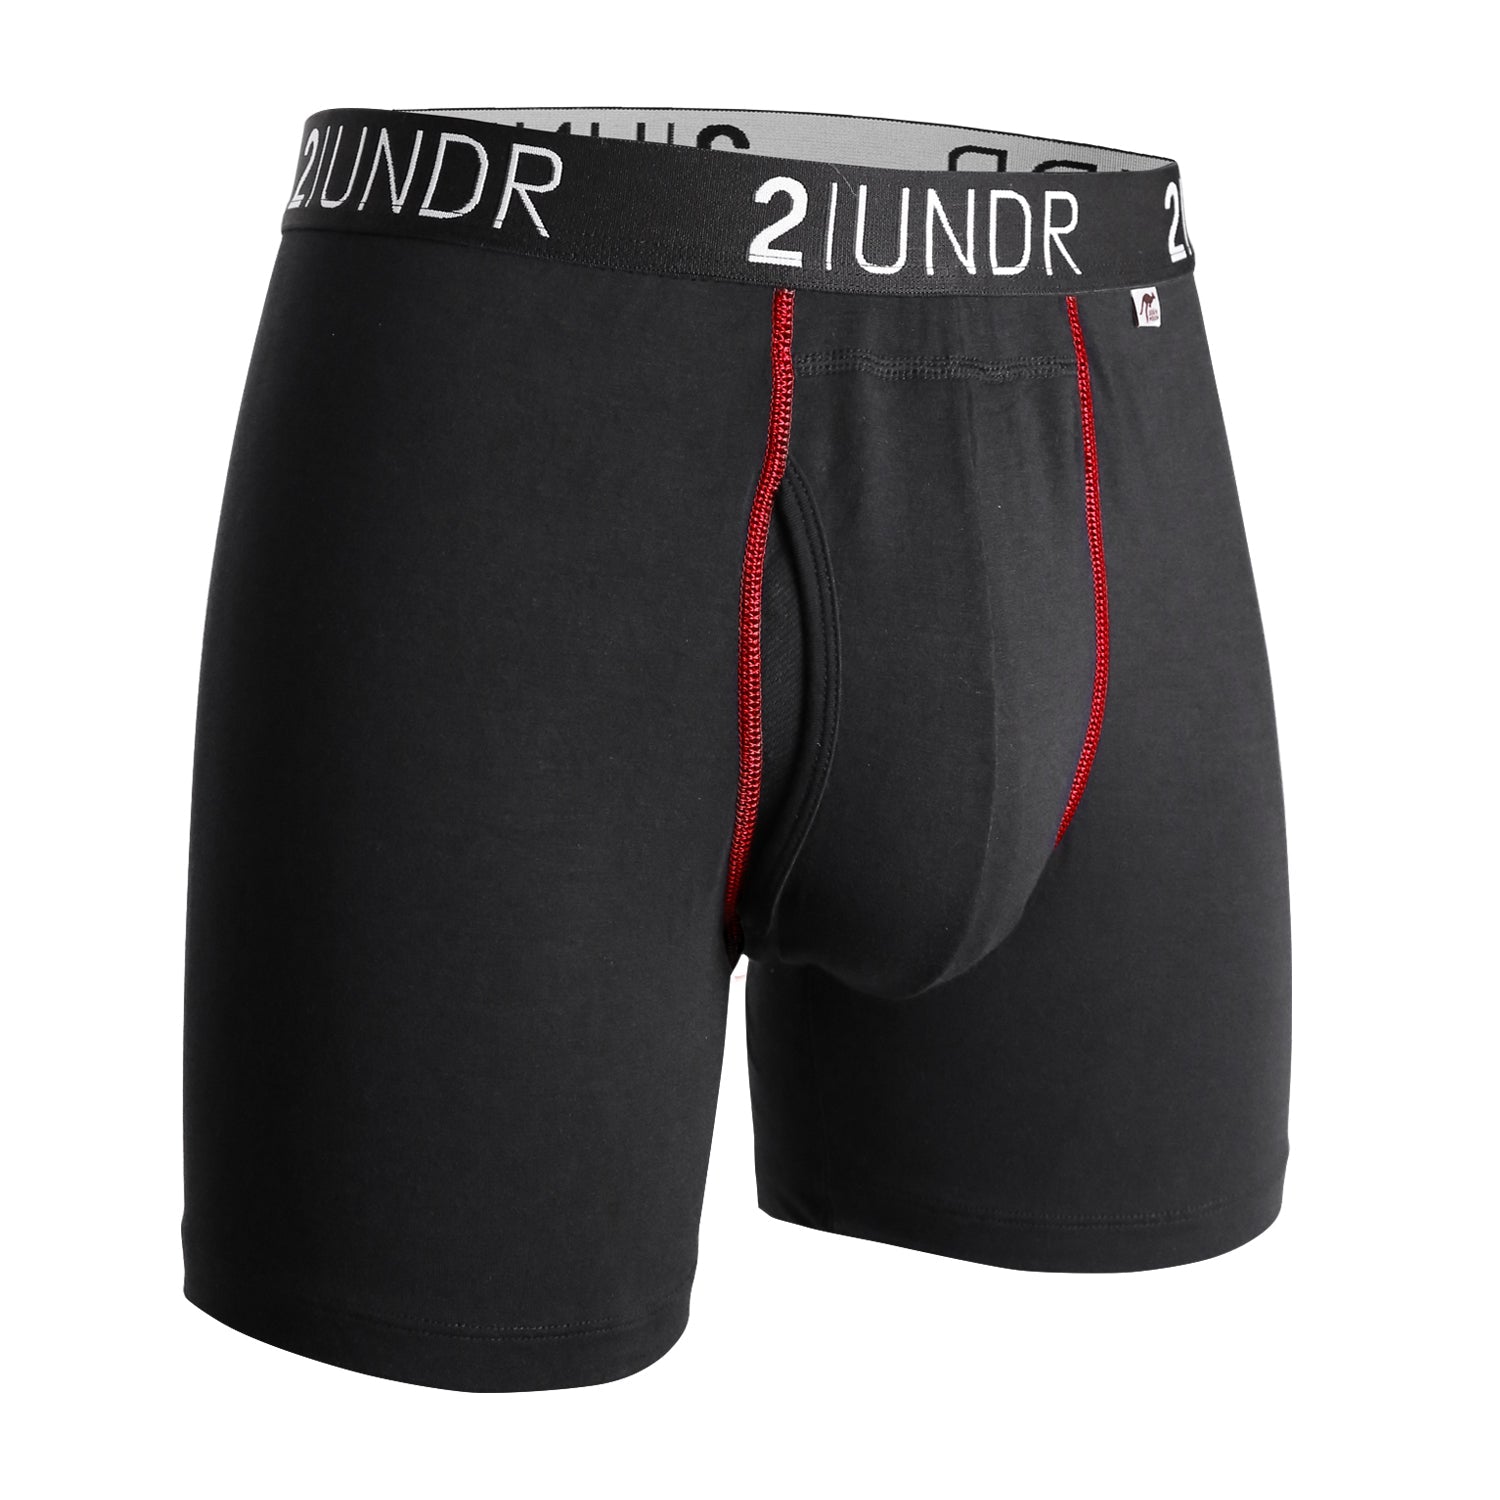 2Undr Swing Shift Boxer Brief Solid - Black/Red* - My Filosophy